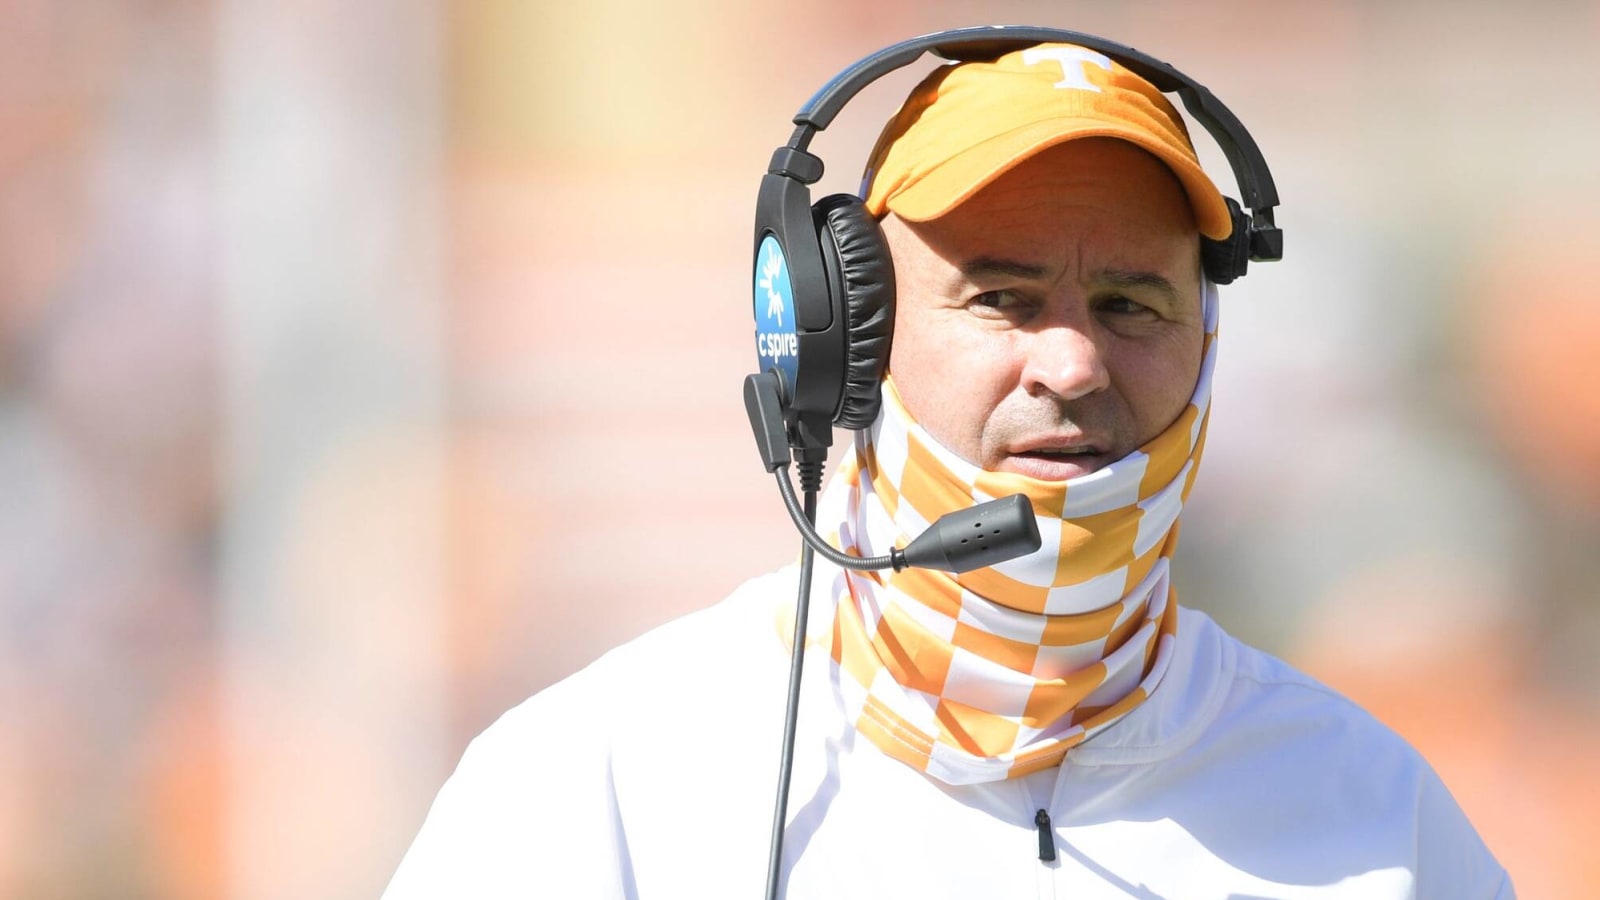 Ex-Tennessee coach paid parent with cash in Chick-fil-A bag